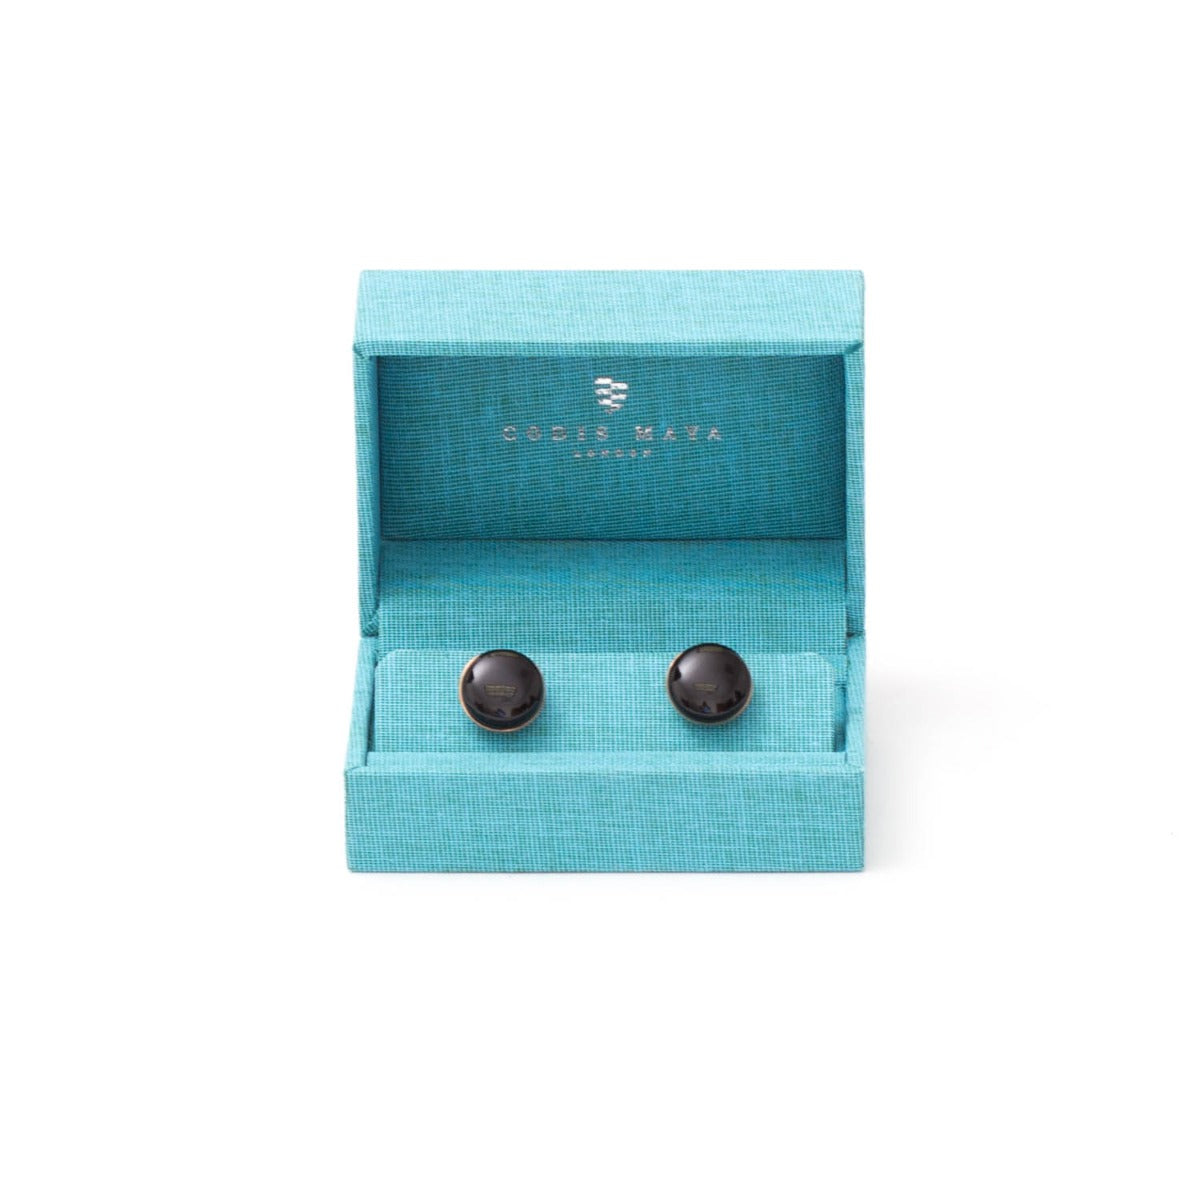 A pair of Onyx Stone Gold Capsule Cufflinks in a blue box from KirbyAllison.com.